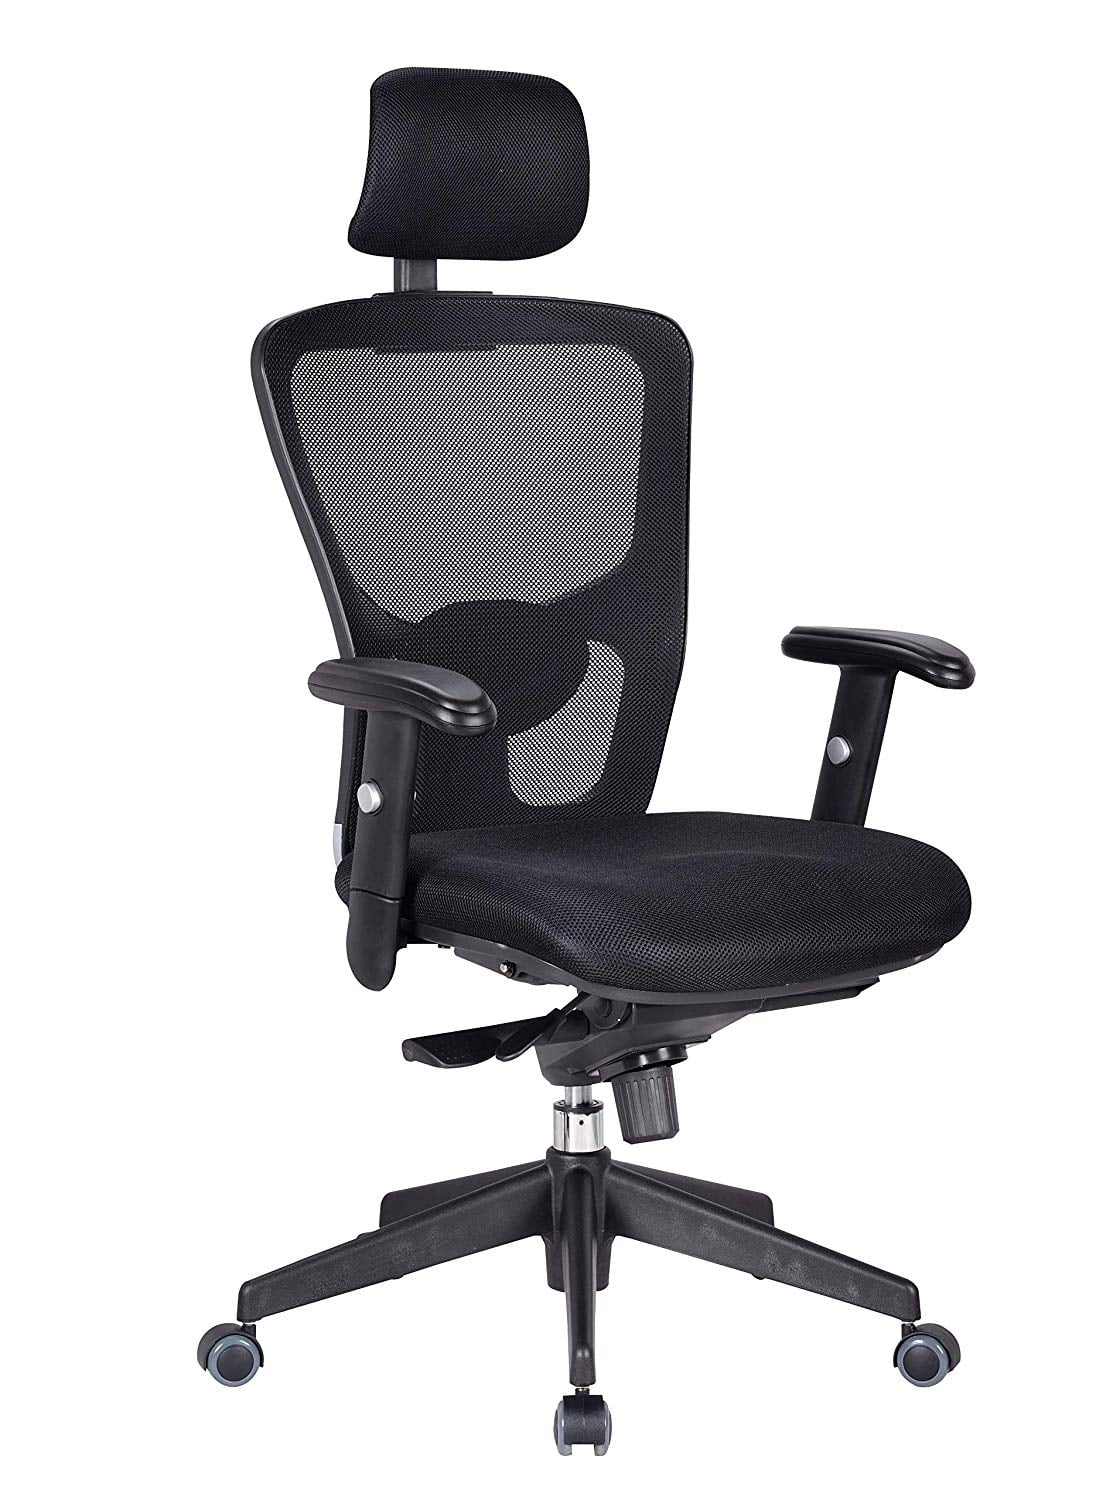 Livearty Adjustable Full Mesh Mid-Back Swivel Office Chair with Armrest